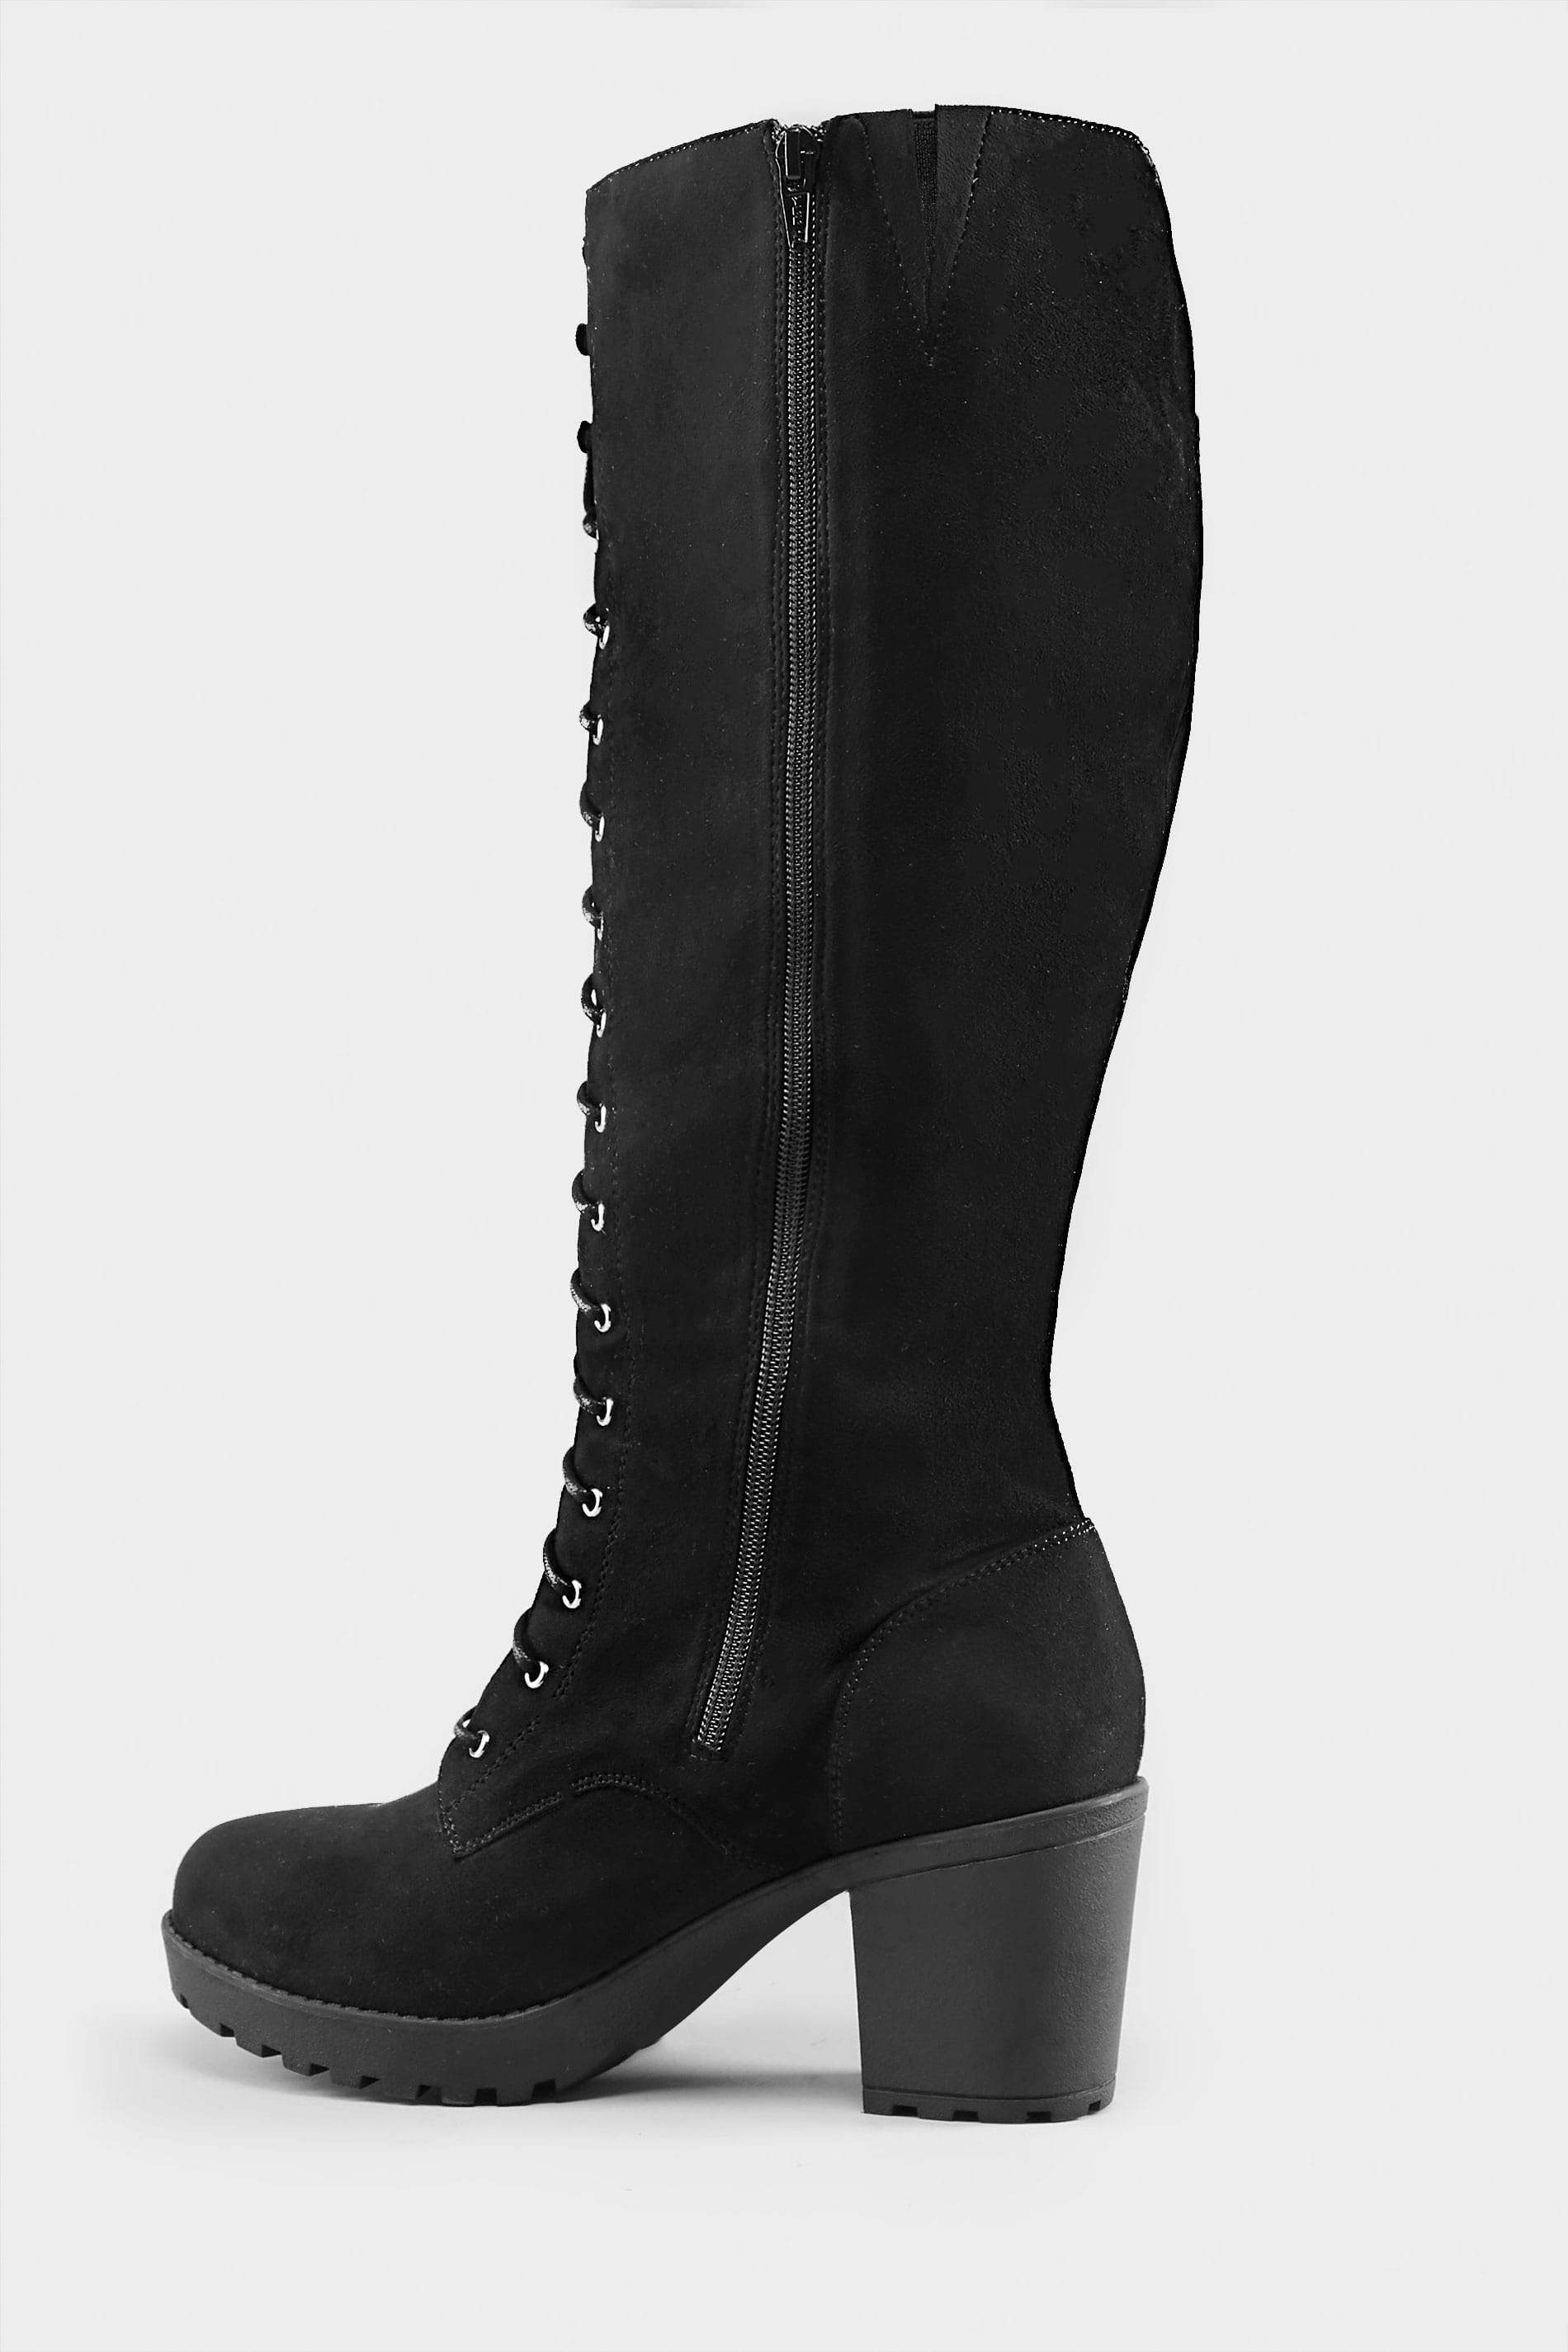 Black Lace Up Heeled Knee High Boots In EEE Fit, Sizes 5EEE to 10EEE